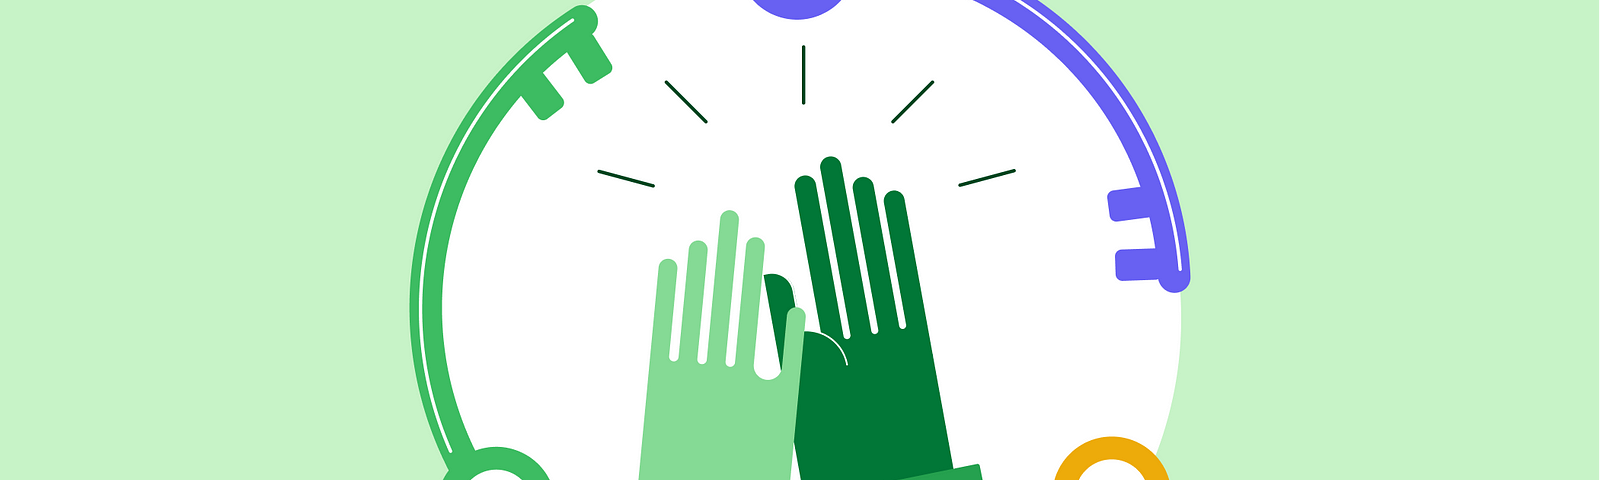 Illustration of hands doing high-five circle of 3 keys around them on green background